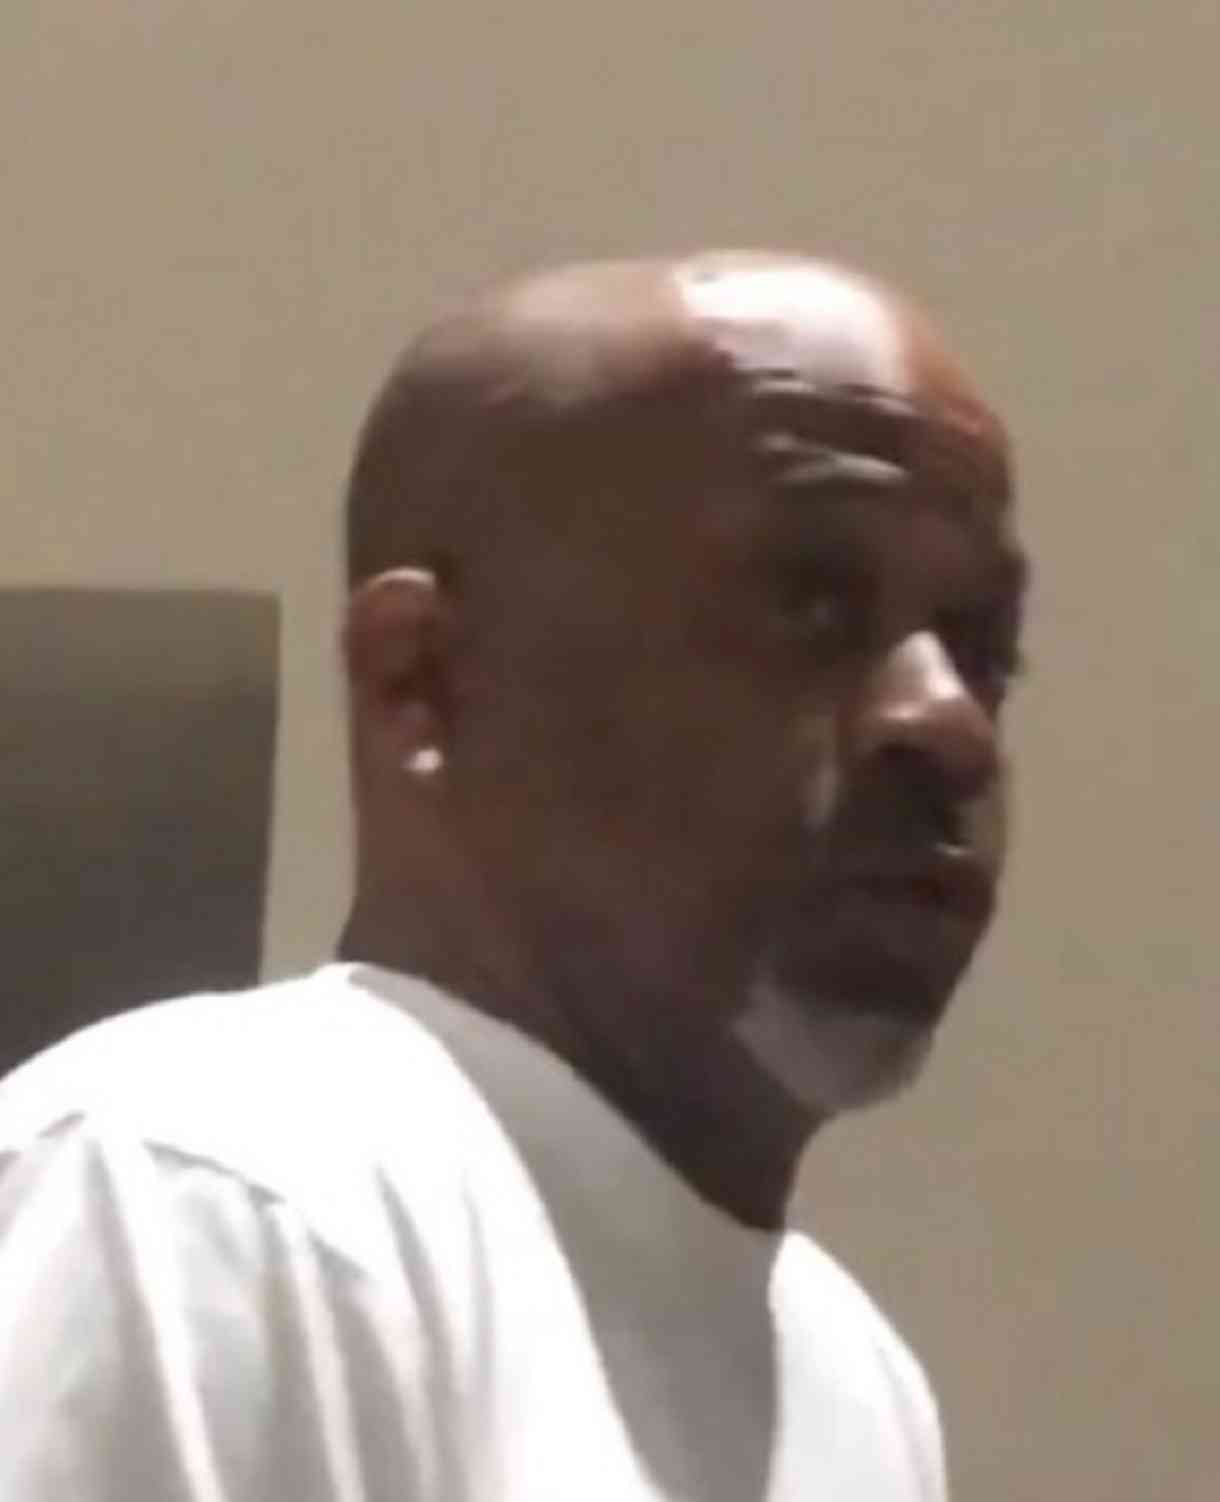 Damon Dash Posts Video of his Female Accuser Trying To Rob and Steal From Him on Instagram